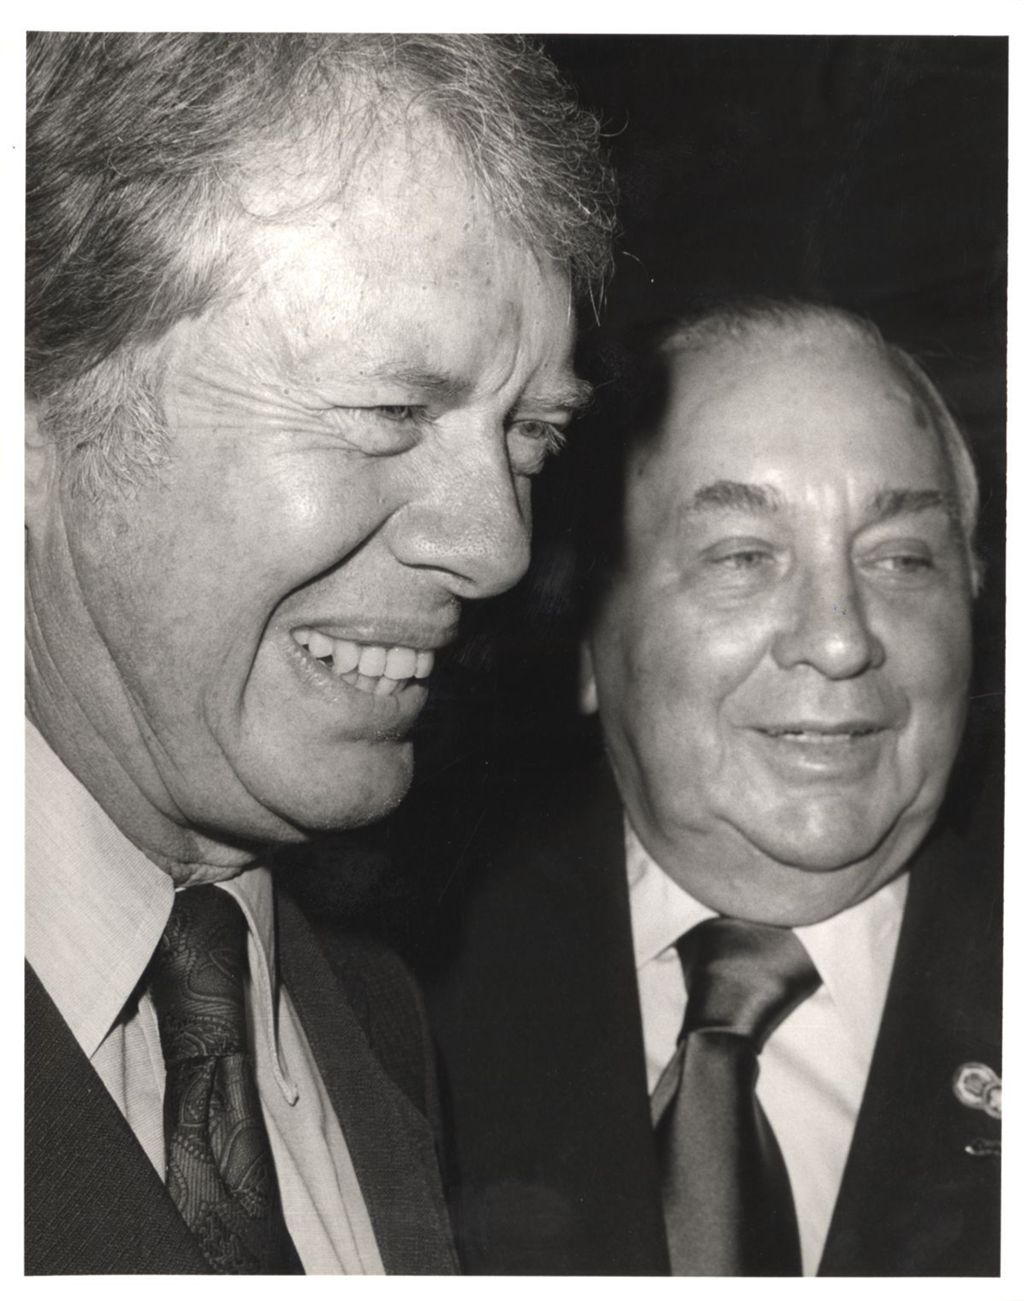 Miniature of Richard J. Daley with Presidential candidate Jimmy Carter